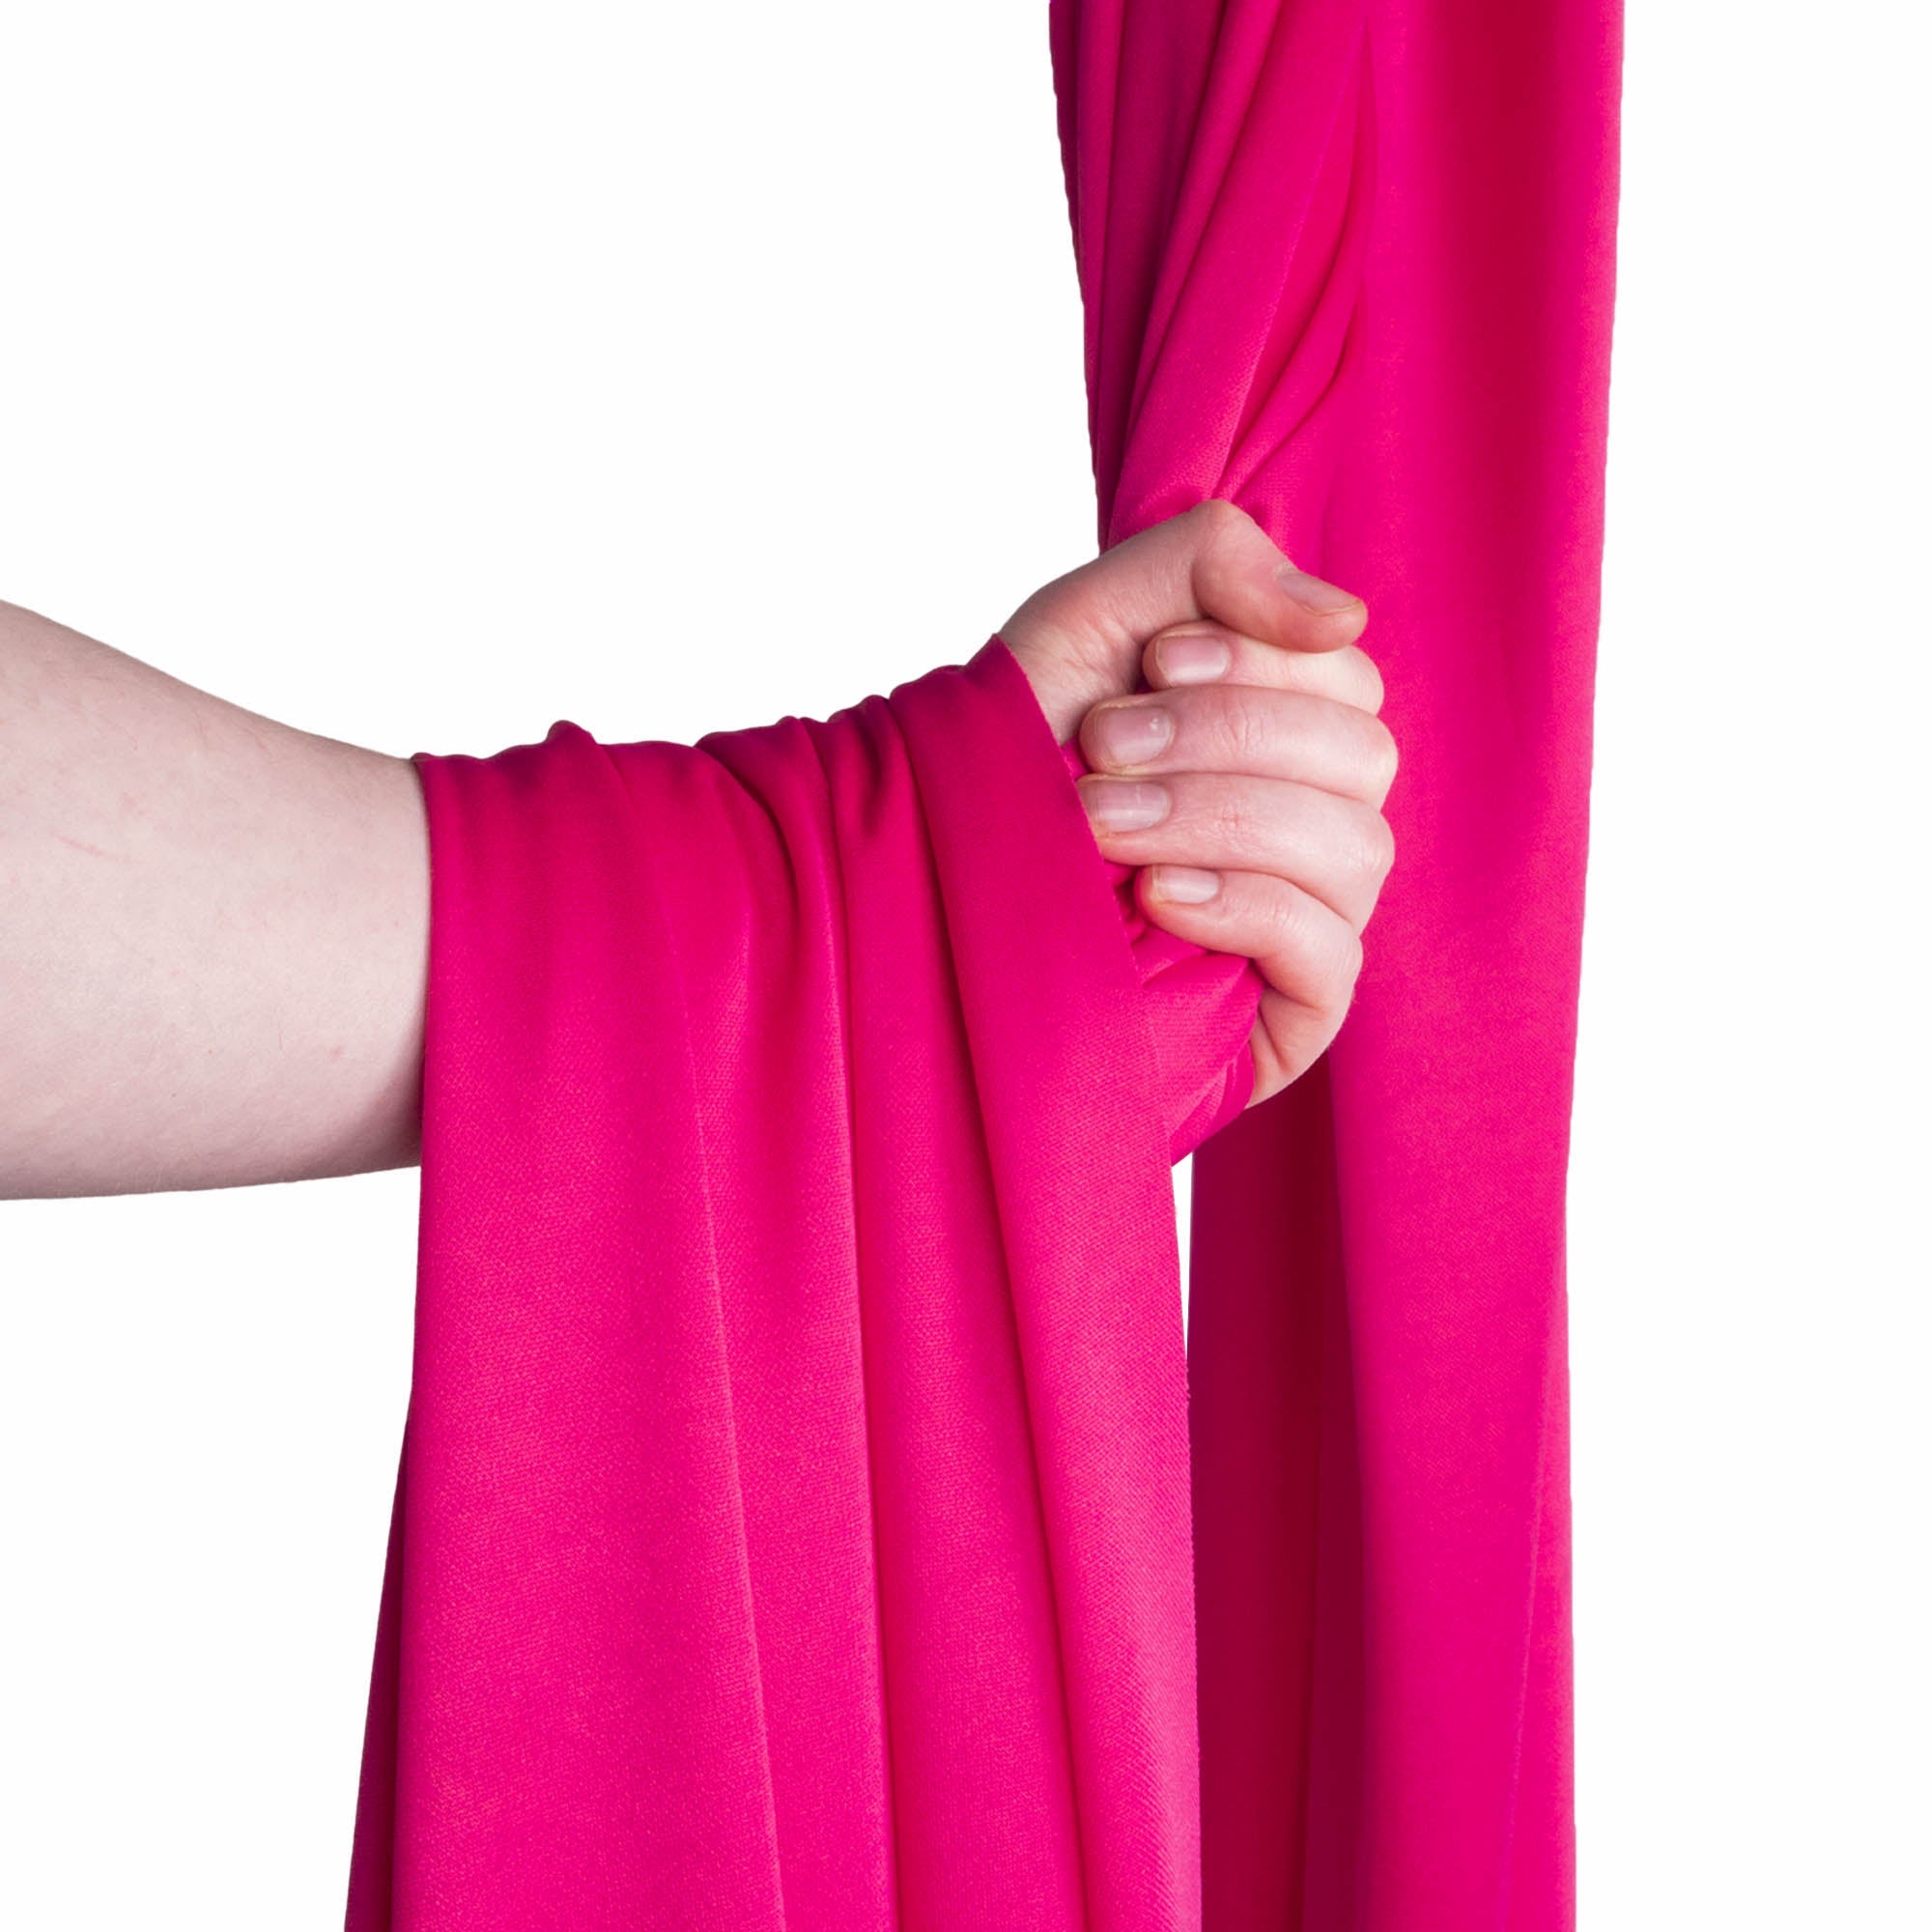 Hot pink silk wrapped over hand